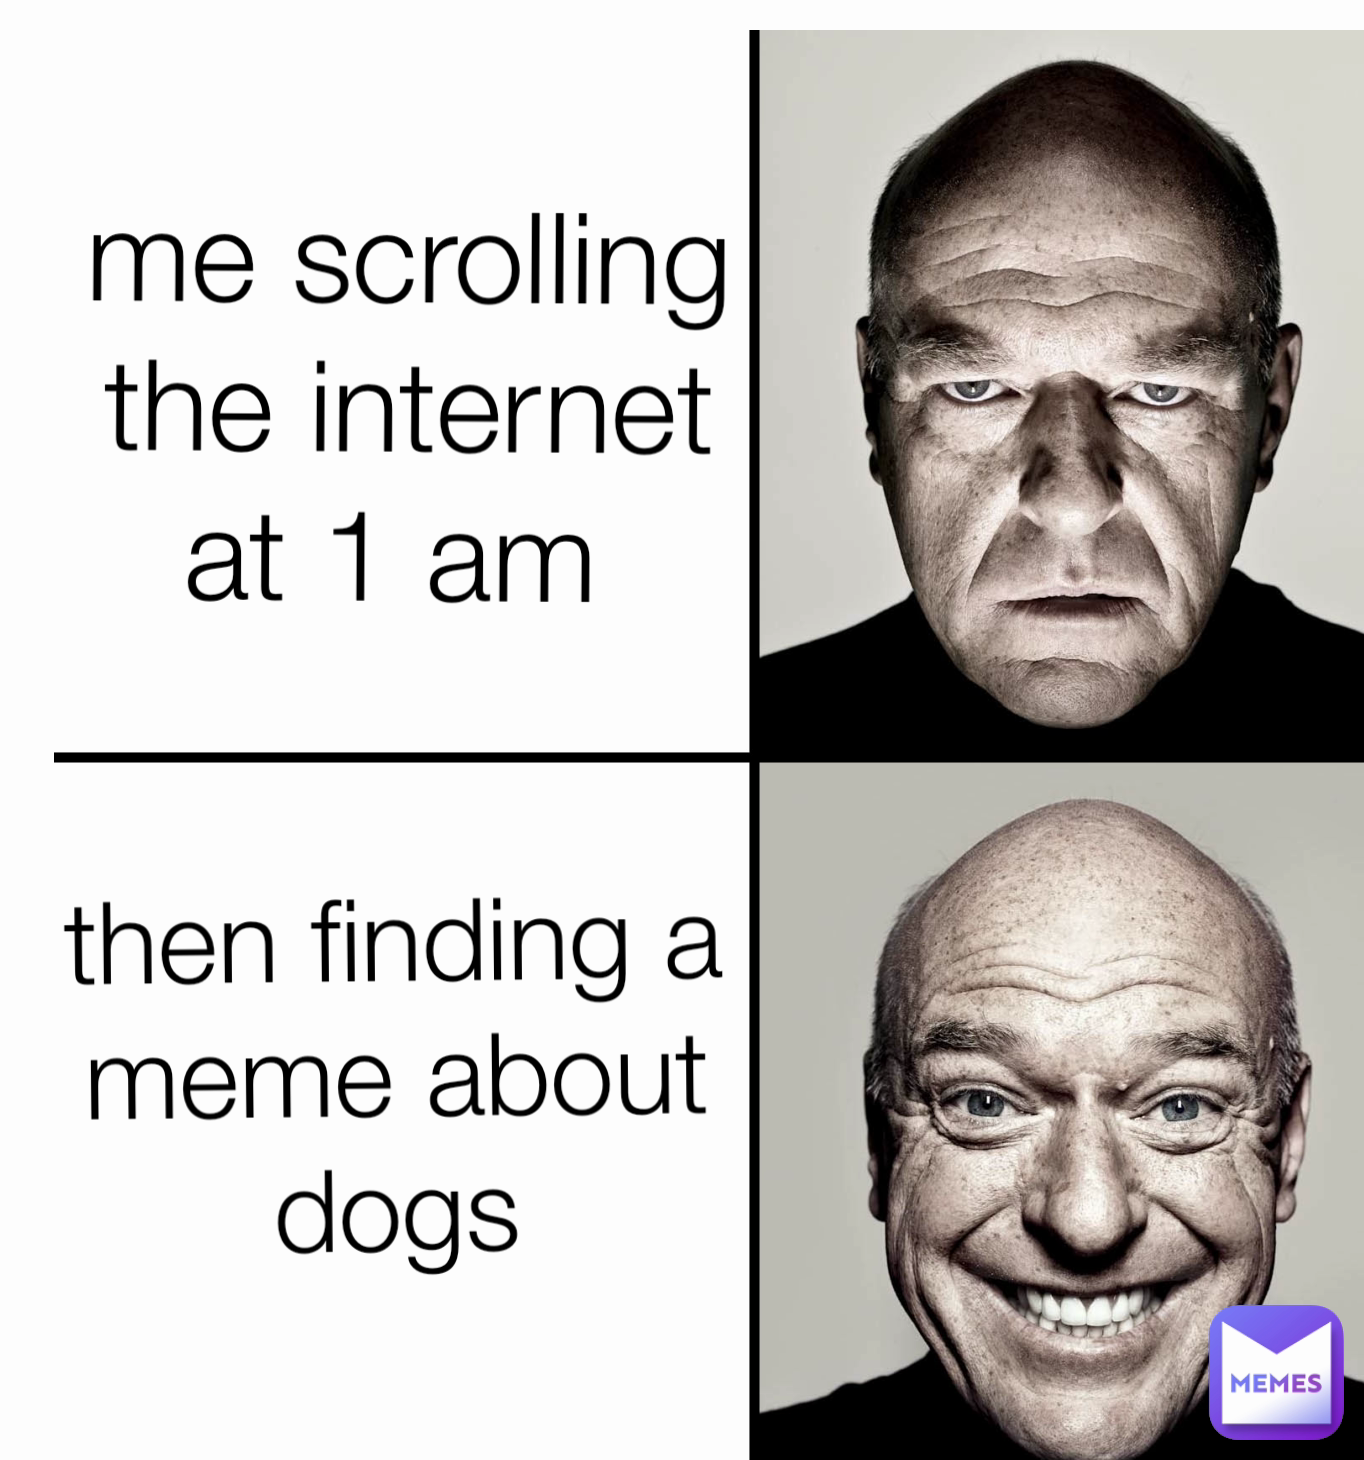 me scrolling the internet at 1 am  then finding a meme about dogs